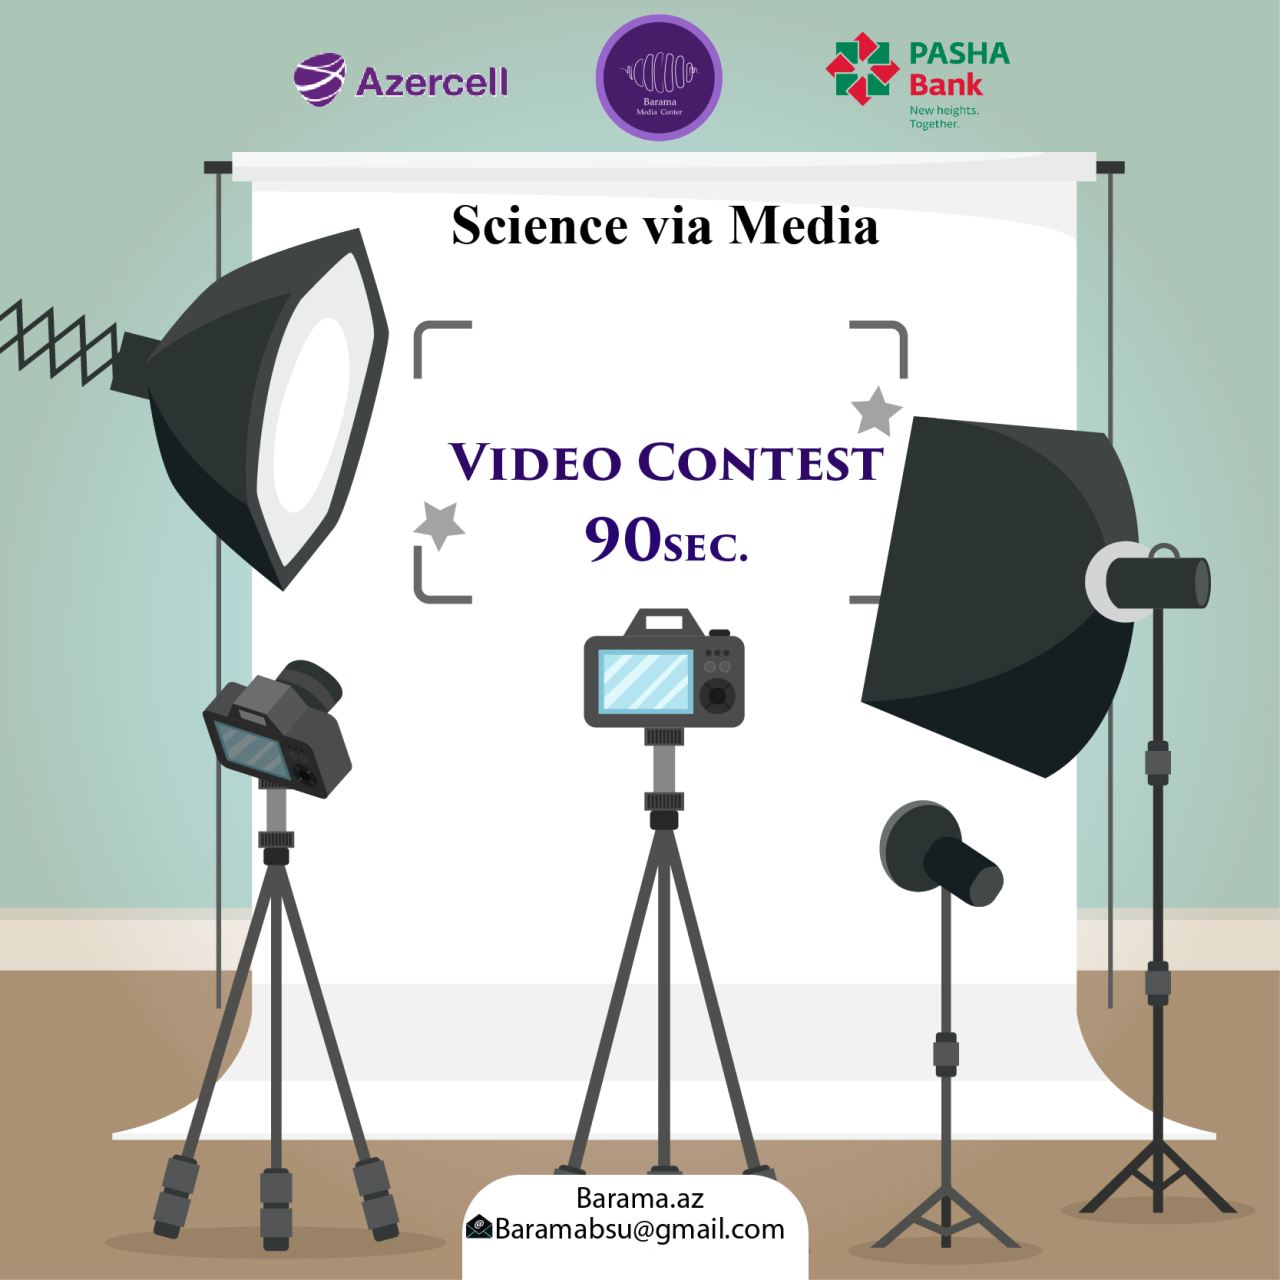 Join "Science via Media" competition with Barama Center